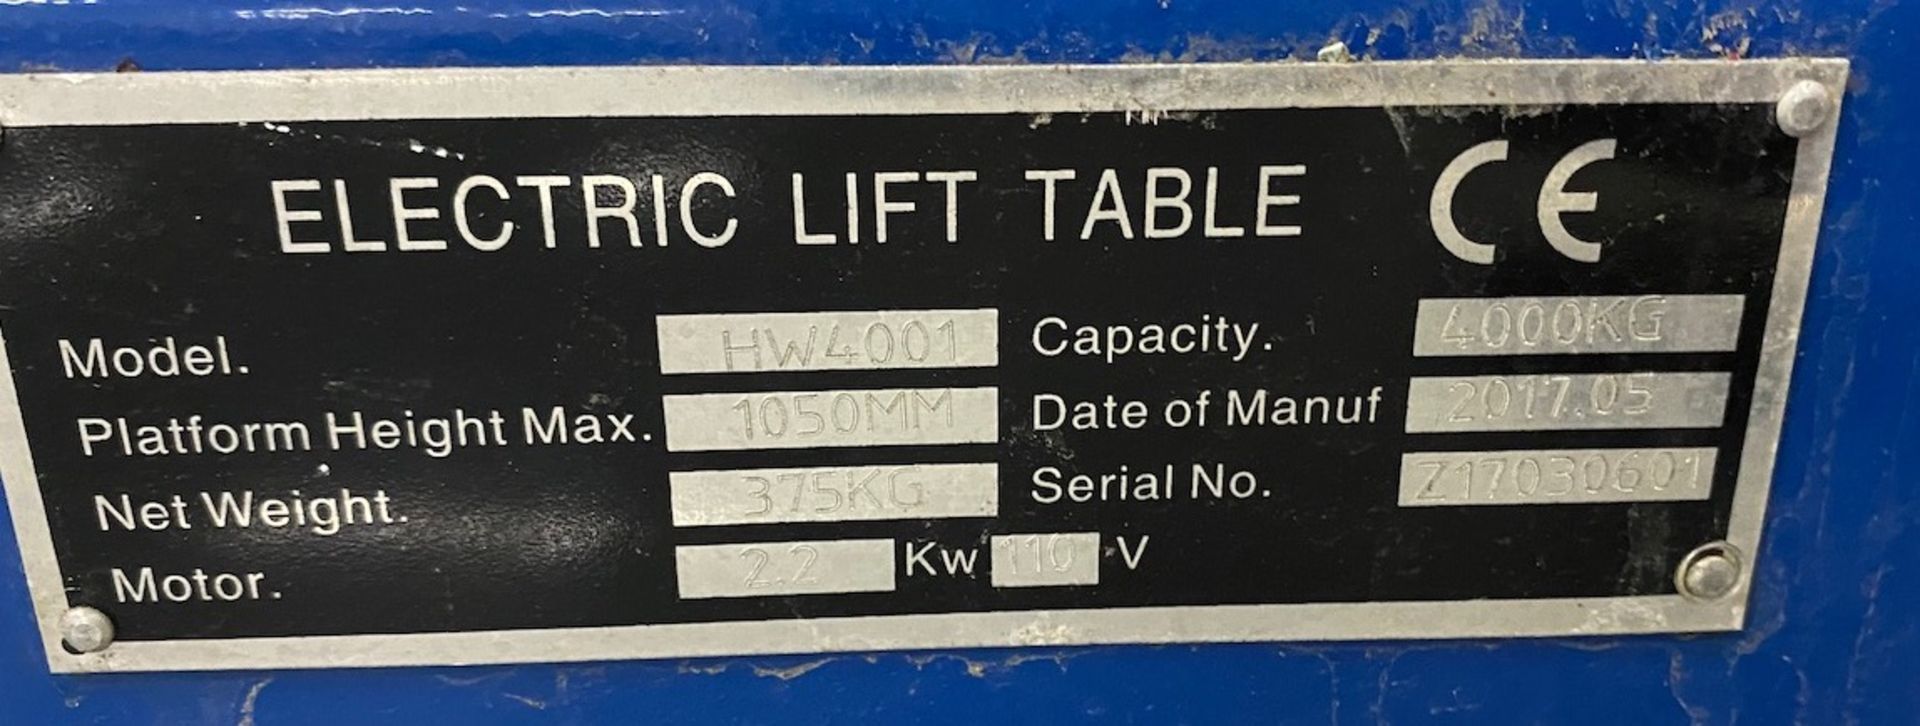 Lift Table - Image 2 of 3